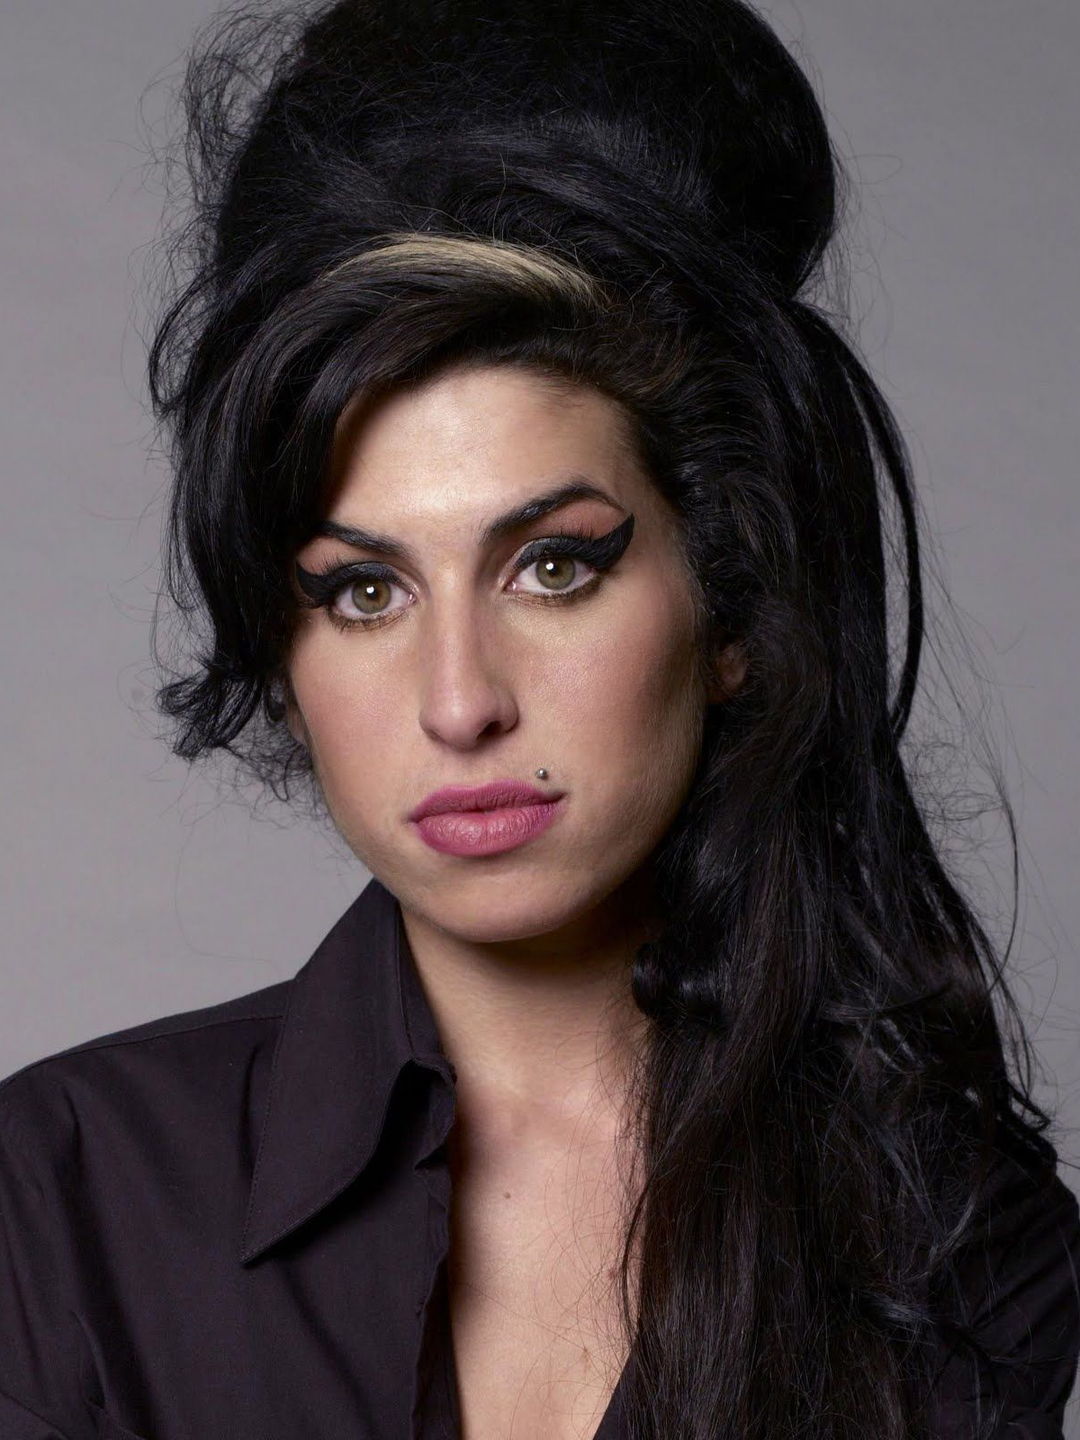 Amy Winehouse date of birth